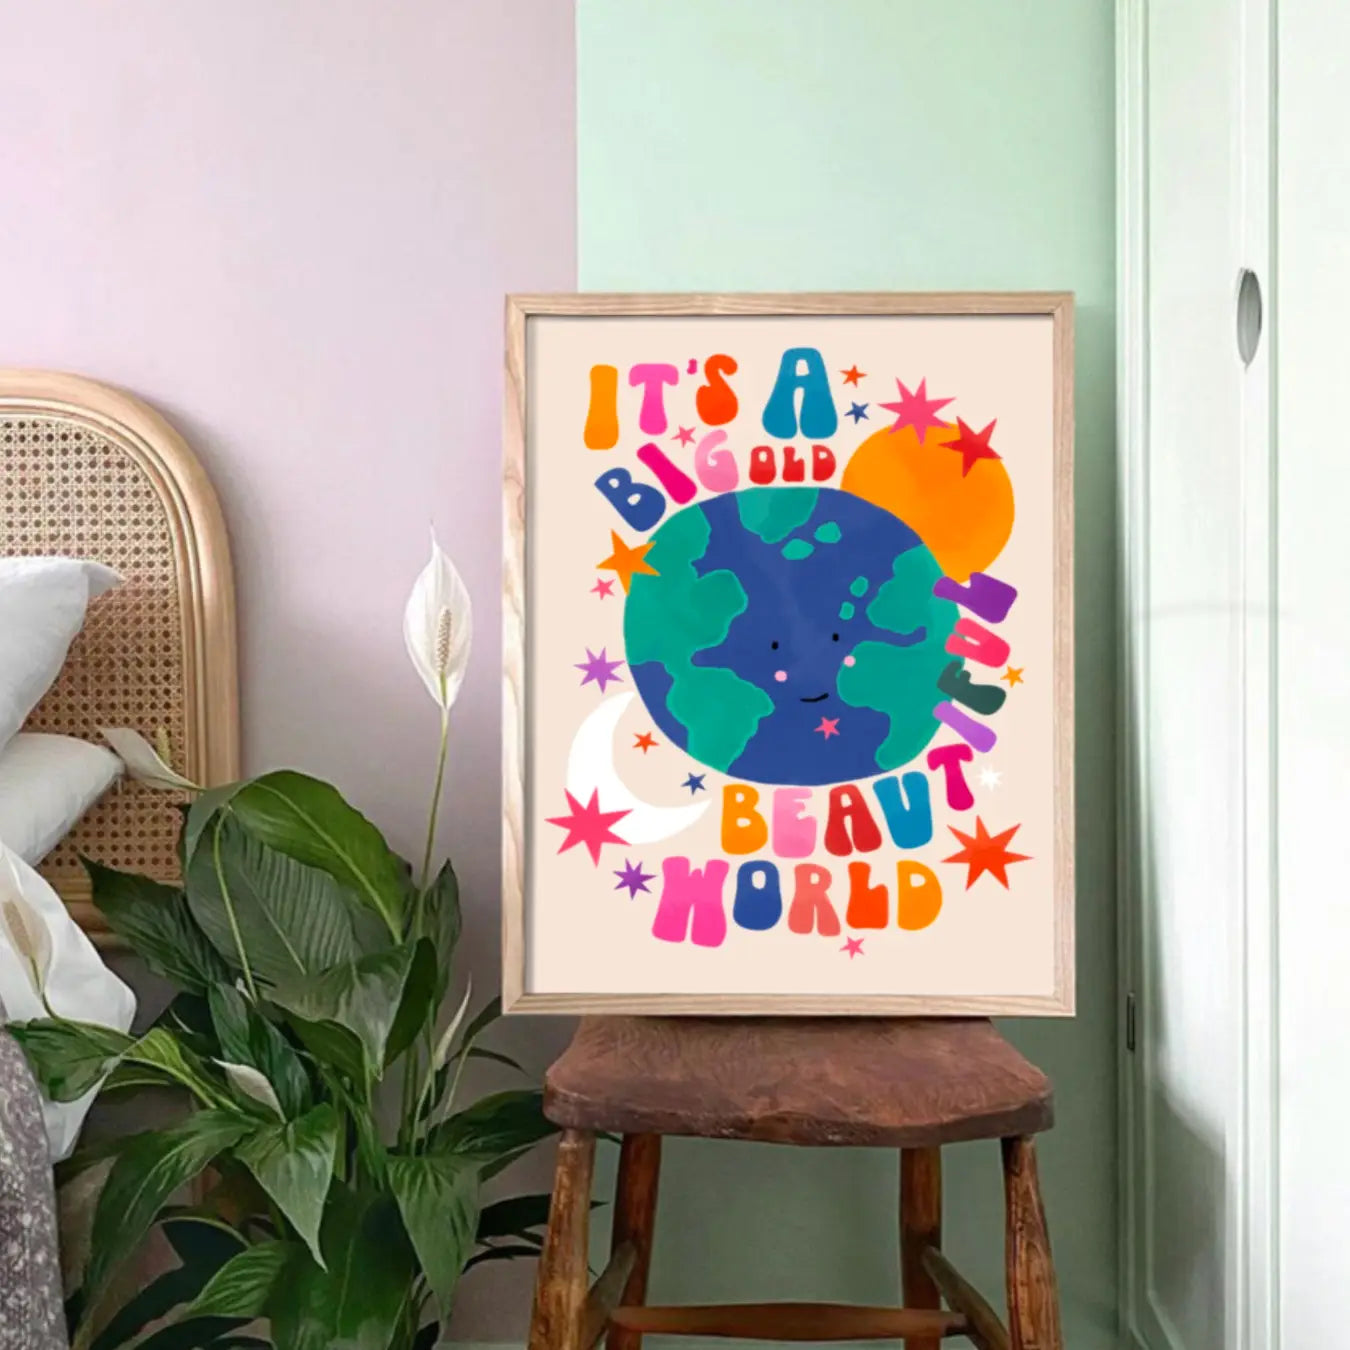 Colourful children's print with earth in the middle and text saying 'it's a big old beautiful world' around it, sitting on a wooden chair, against a mint green wall and next to a plant